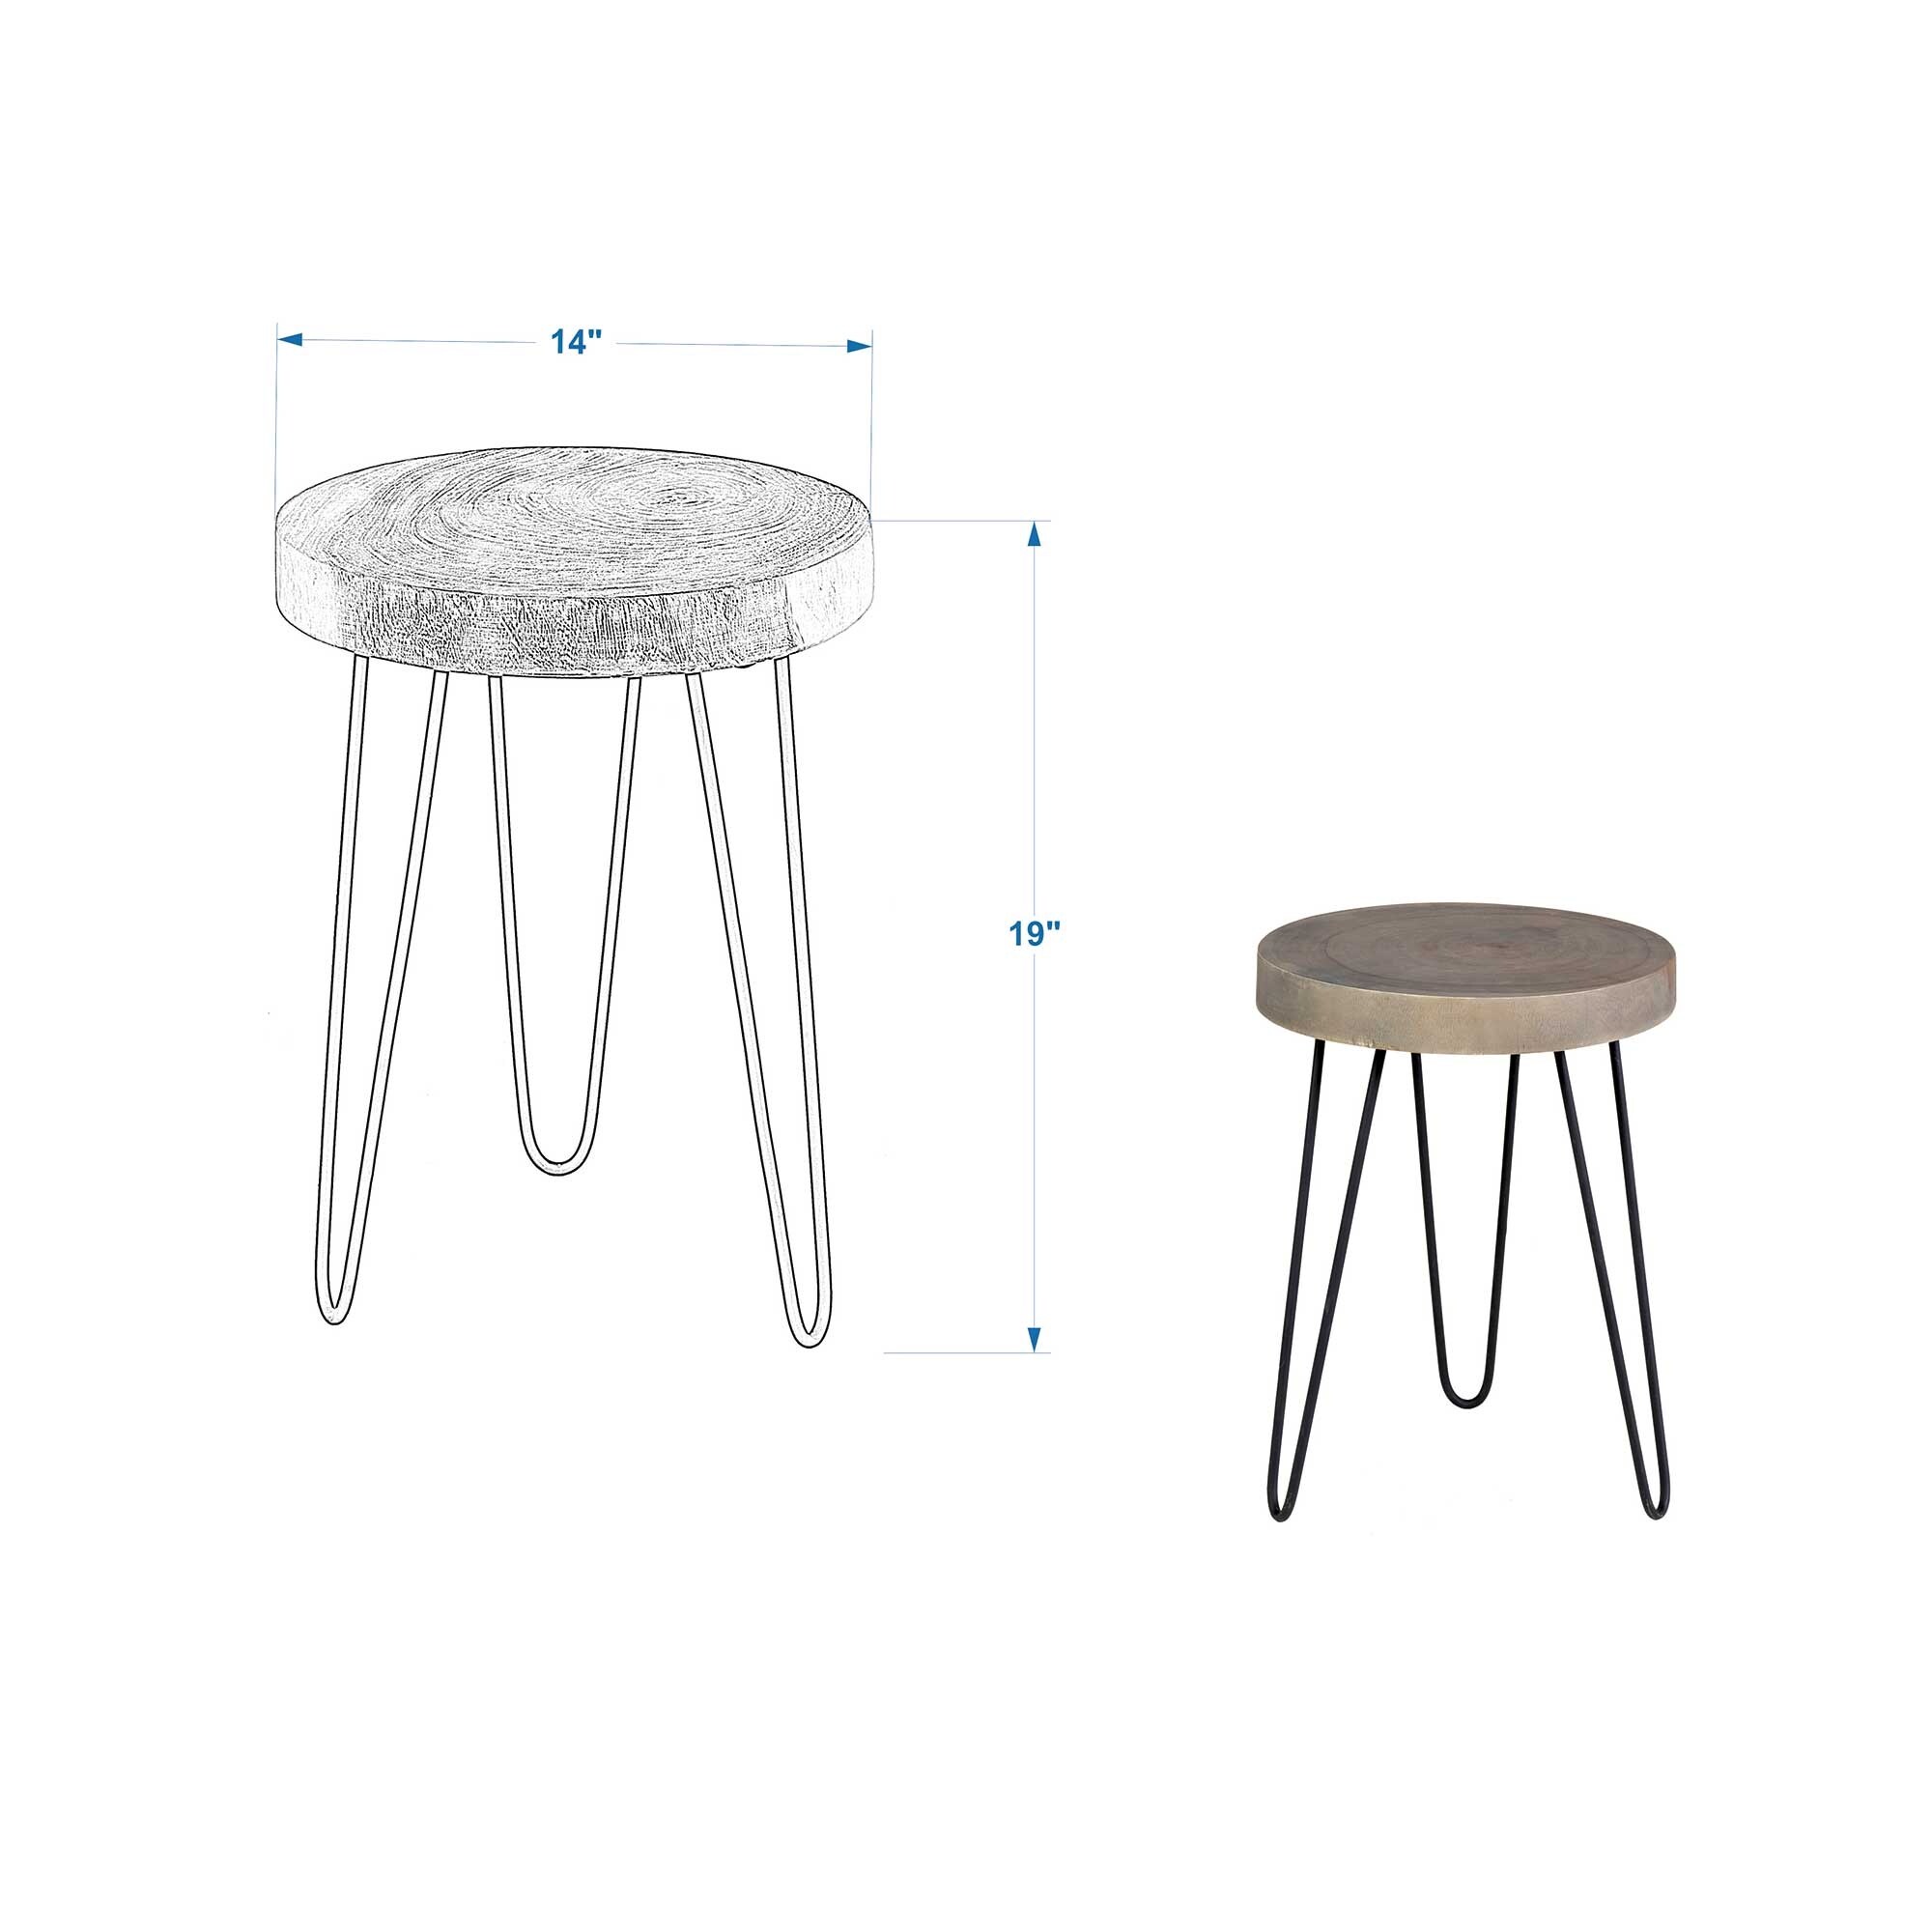 https://ak1.ostkcdn.com/images/products/is/images/direct/d39433d068cb91a3d42487bb04bde2e61e824ada/Natural-Wood-Cross-Cut-Side-Table-with-Iron-Hairpin-Legs.jpg